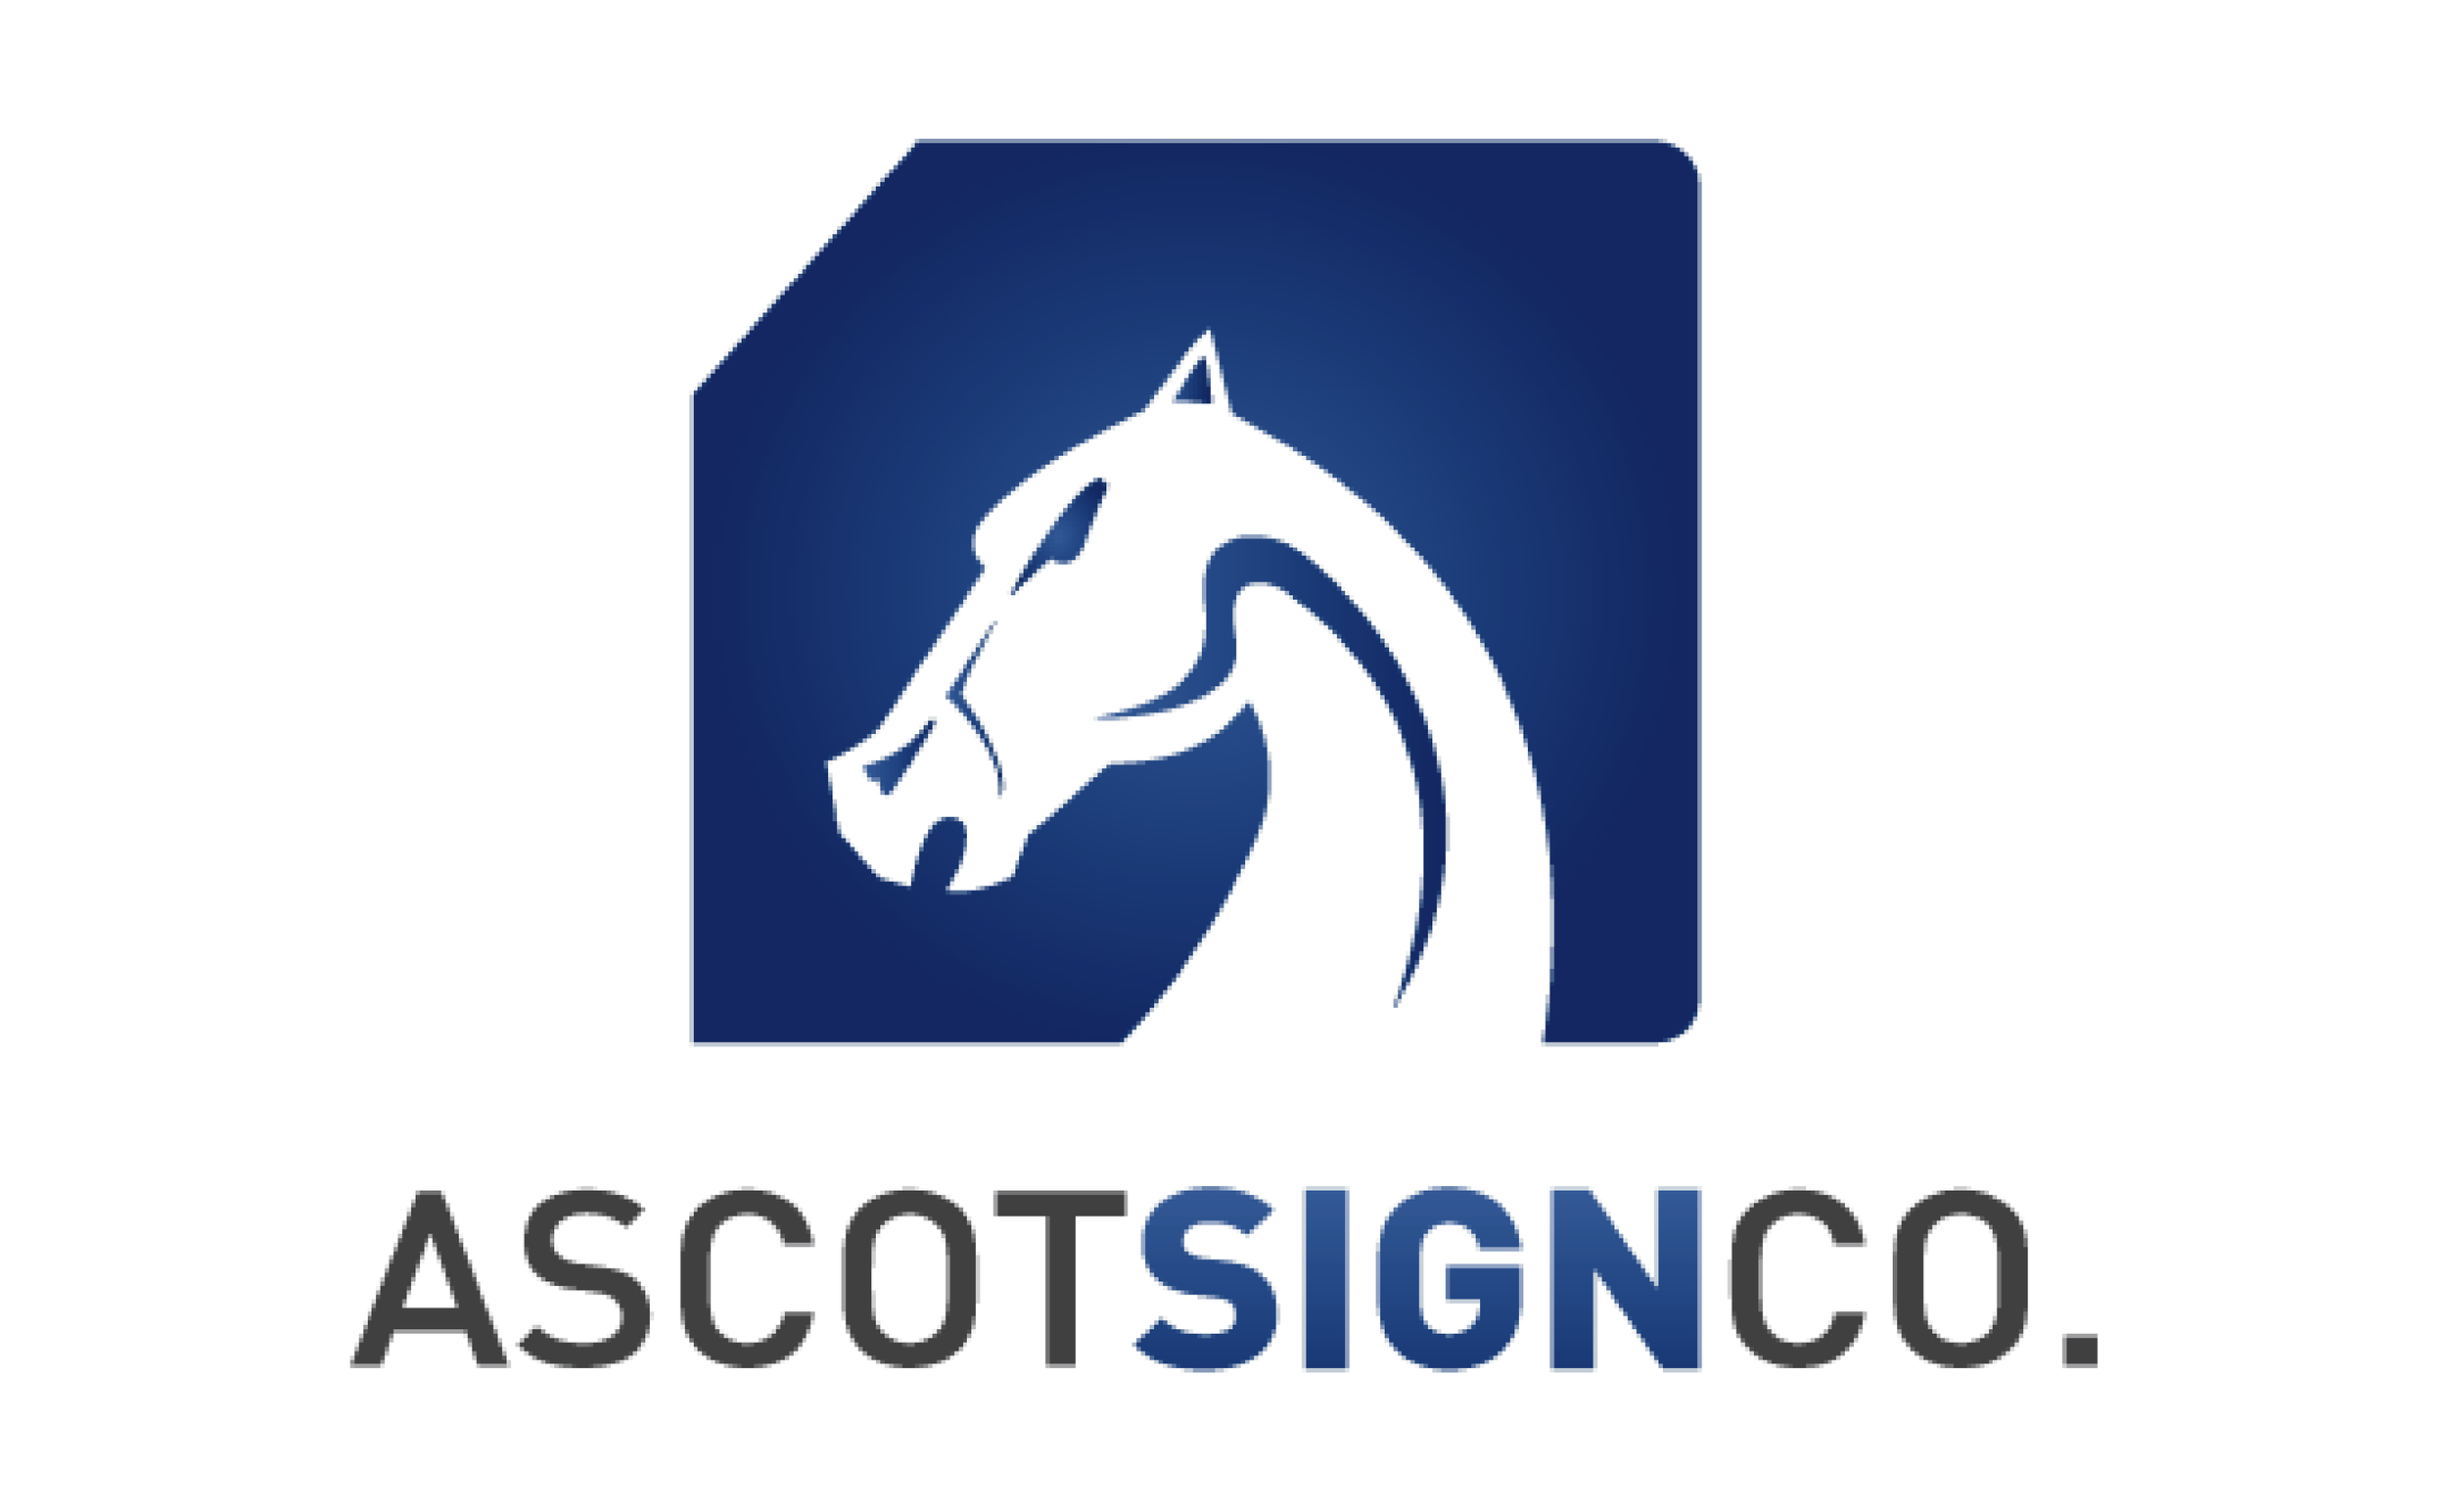 Ascot Sign Co